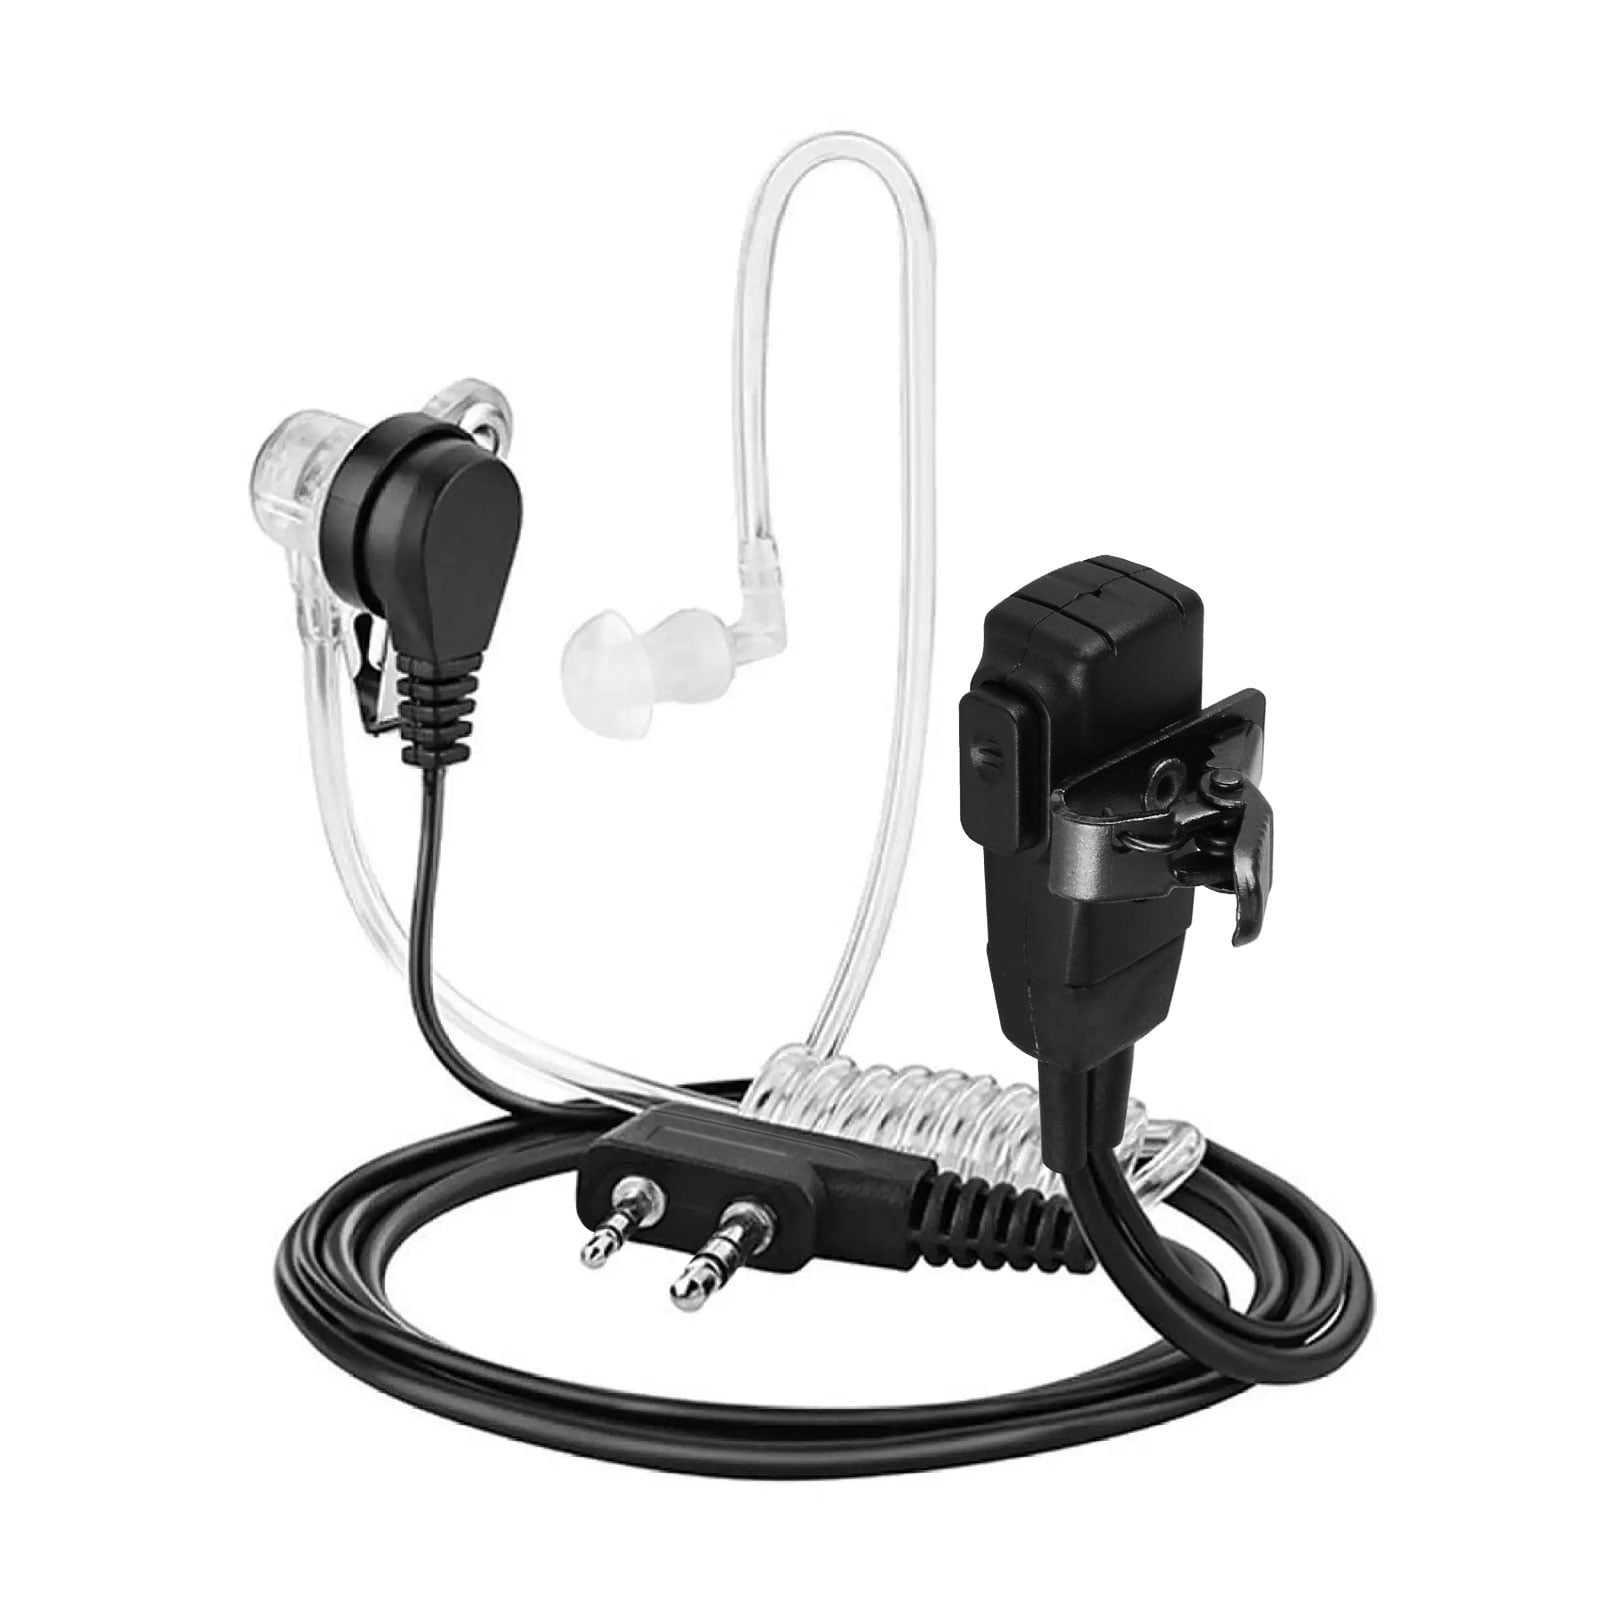 with Medium Ear molds 2 Pin Covert Acoustic Tube Earpiece Headset with Mic PTT for Motorola CLS1410 CLS1110 CP200 GP300 GP2000 T600 T100 T800 Walkie Talkie 2 Way Radio 2 Pack